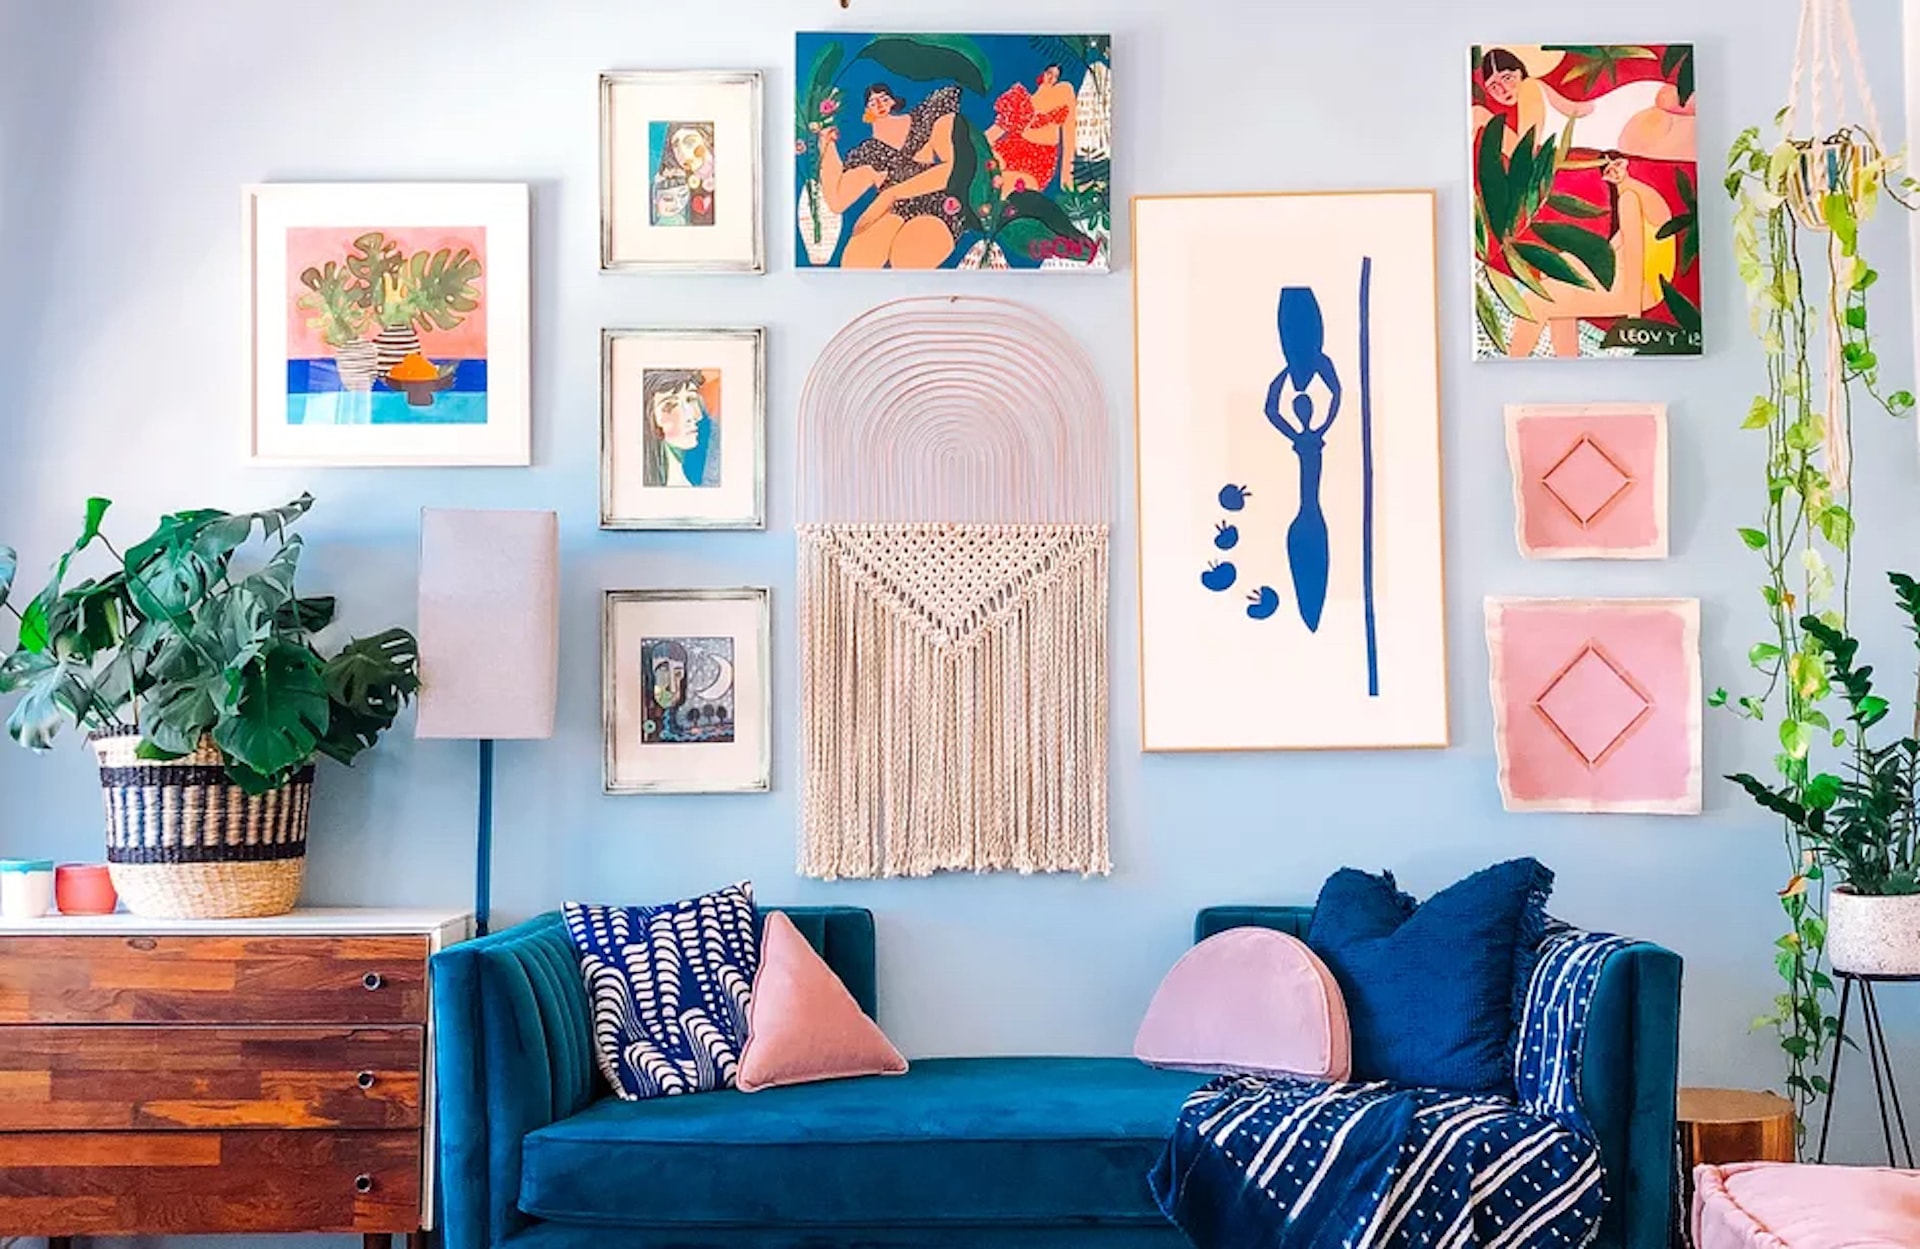 How To Make A Stunning Gallery Wall (Plus 15 Unique Themes)